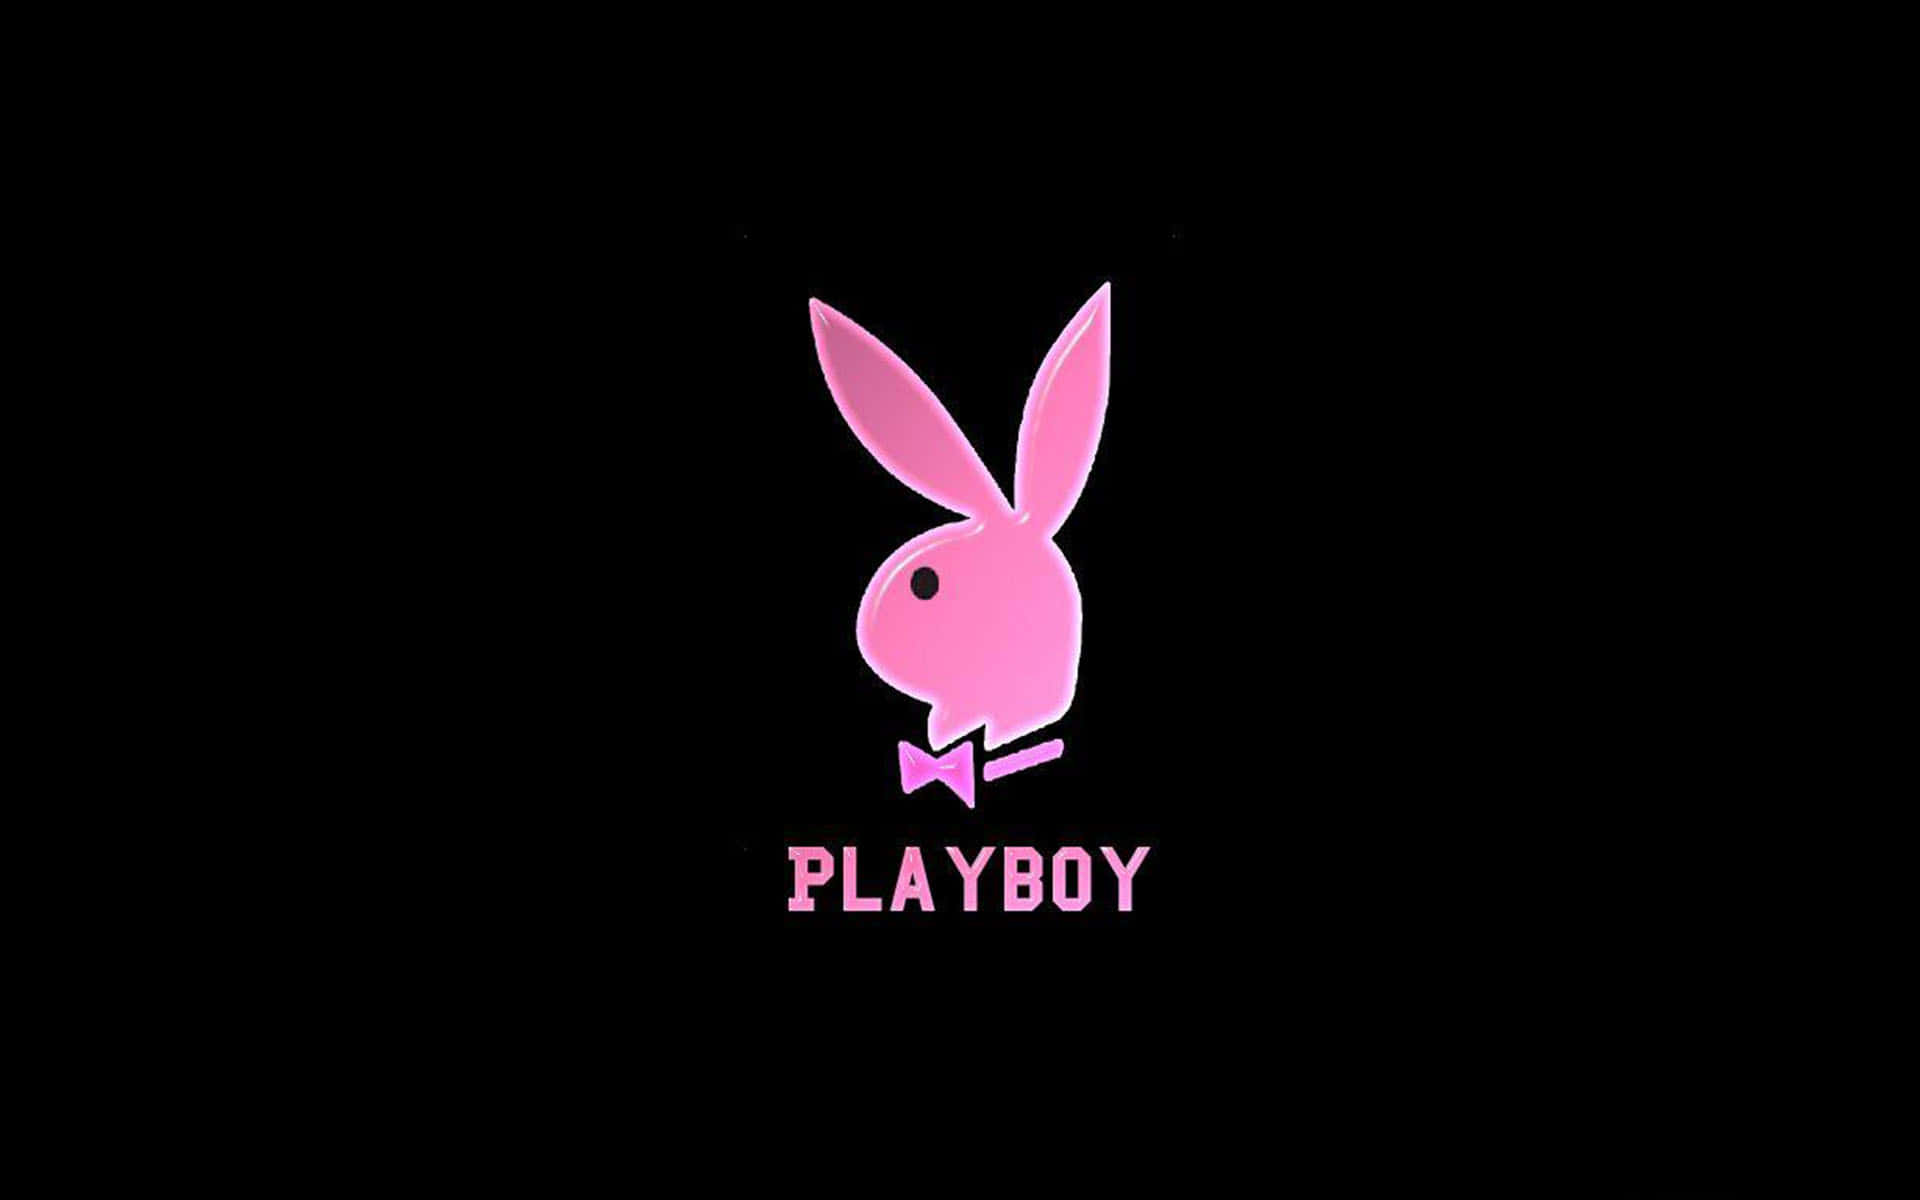 Playboy's Unique Take On Classy and Glamorous